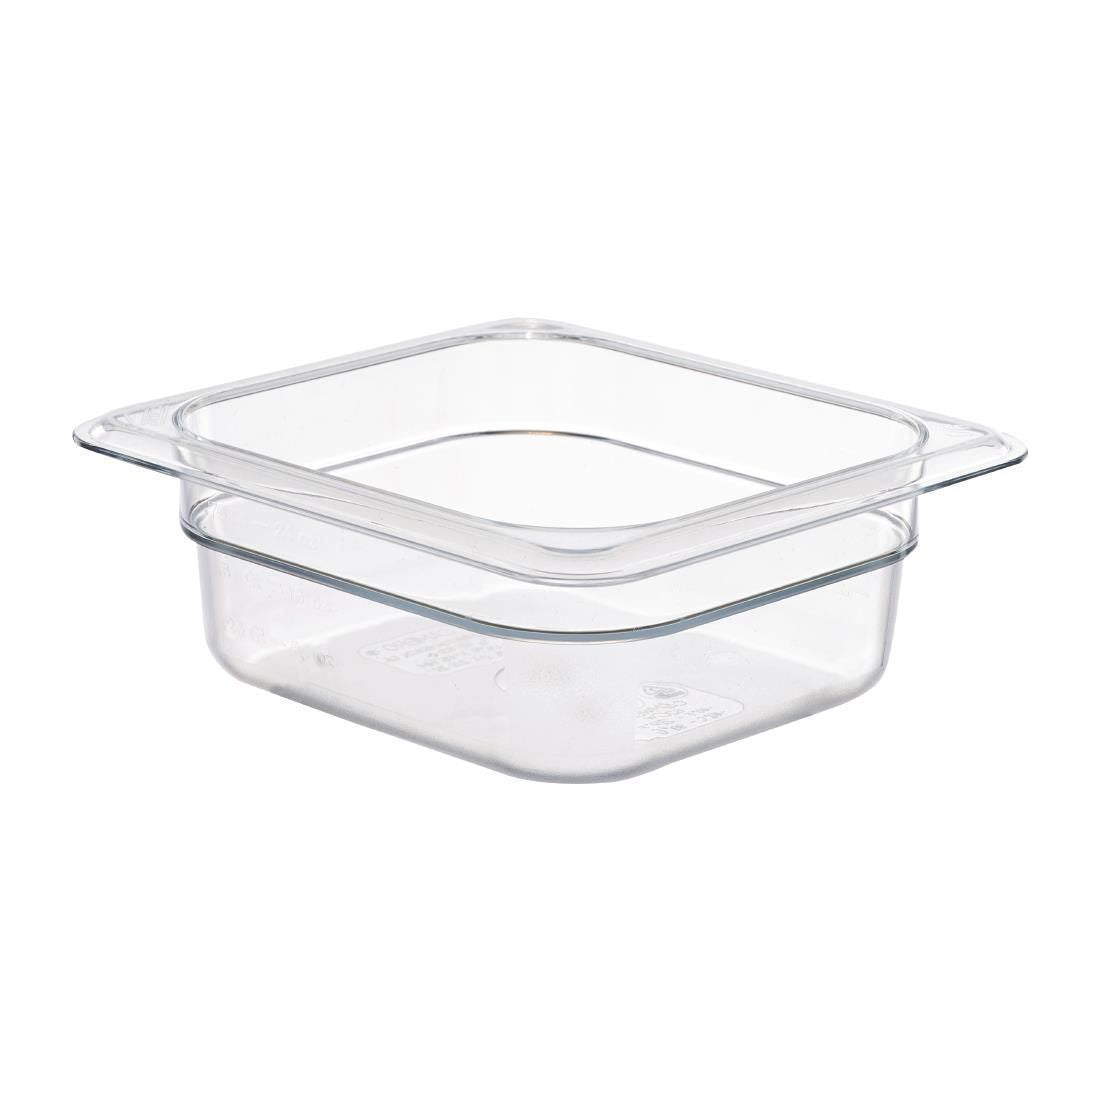 DM754 Cambro Polycarbonate 1/6 Gastronorm Pan 65mm JD Catering Equipment Solutions Ltd